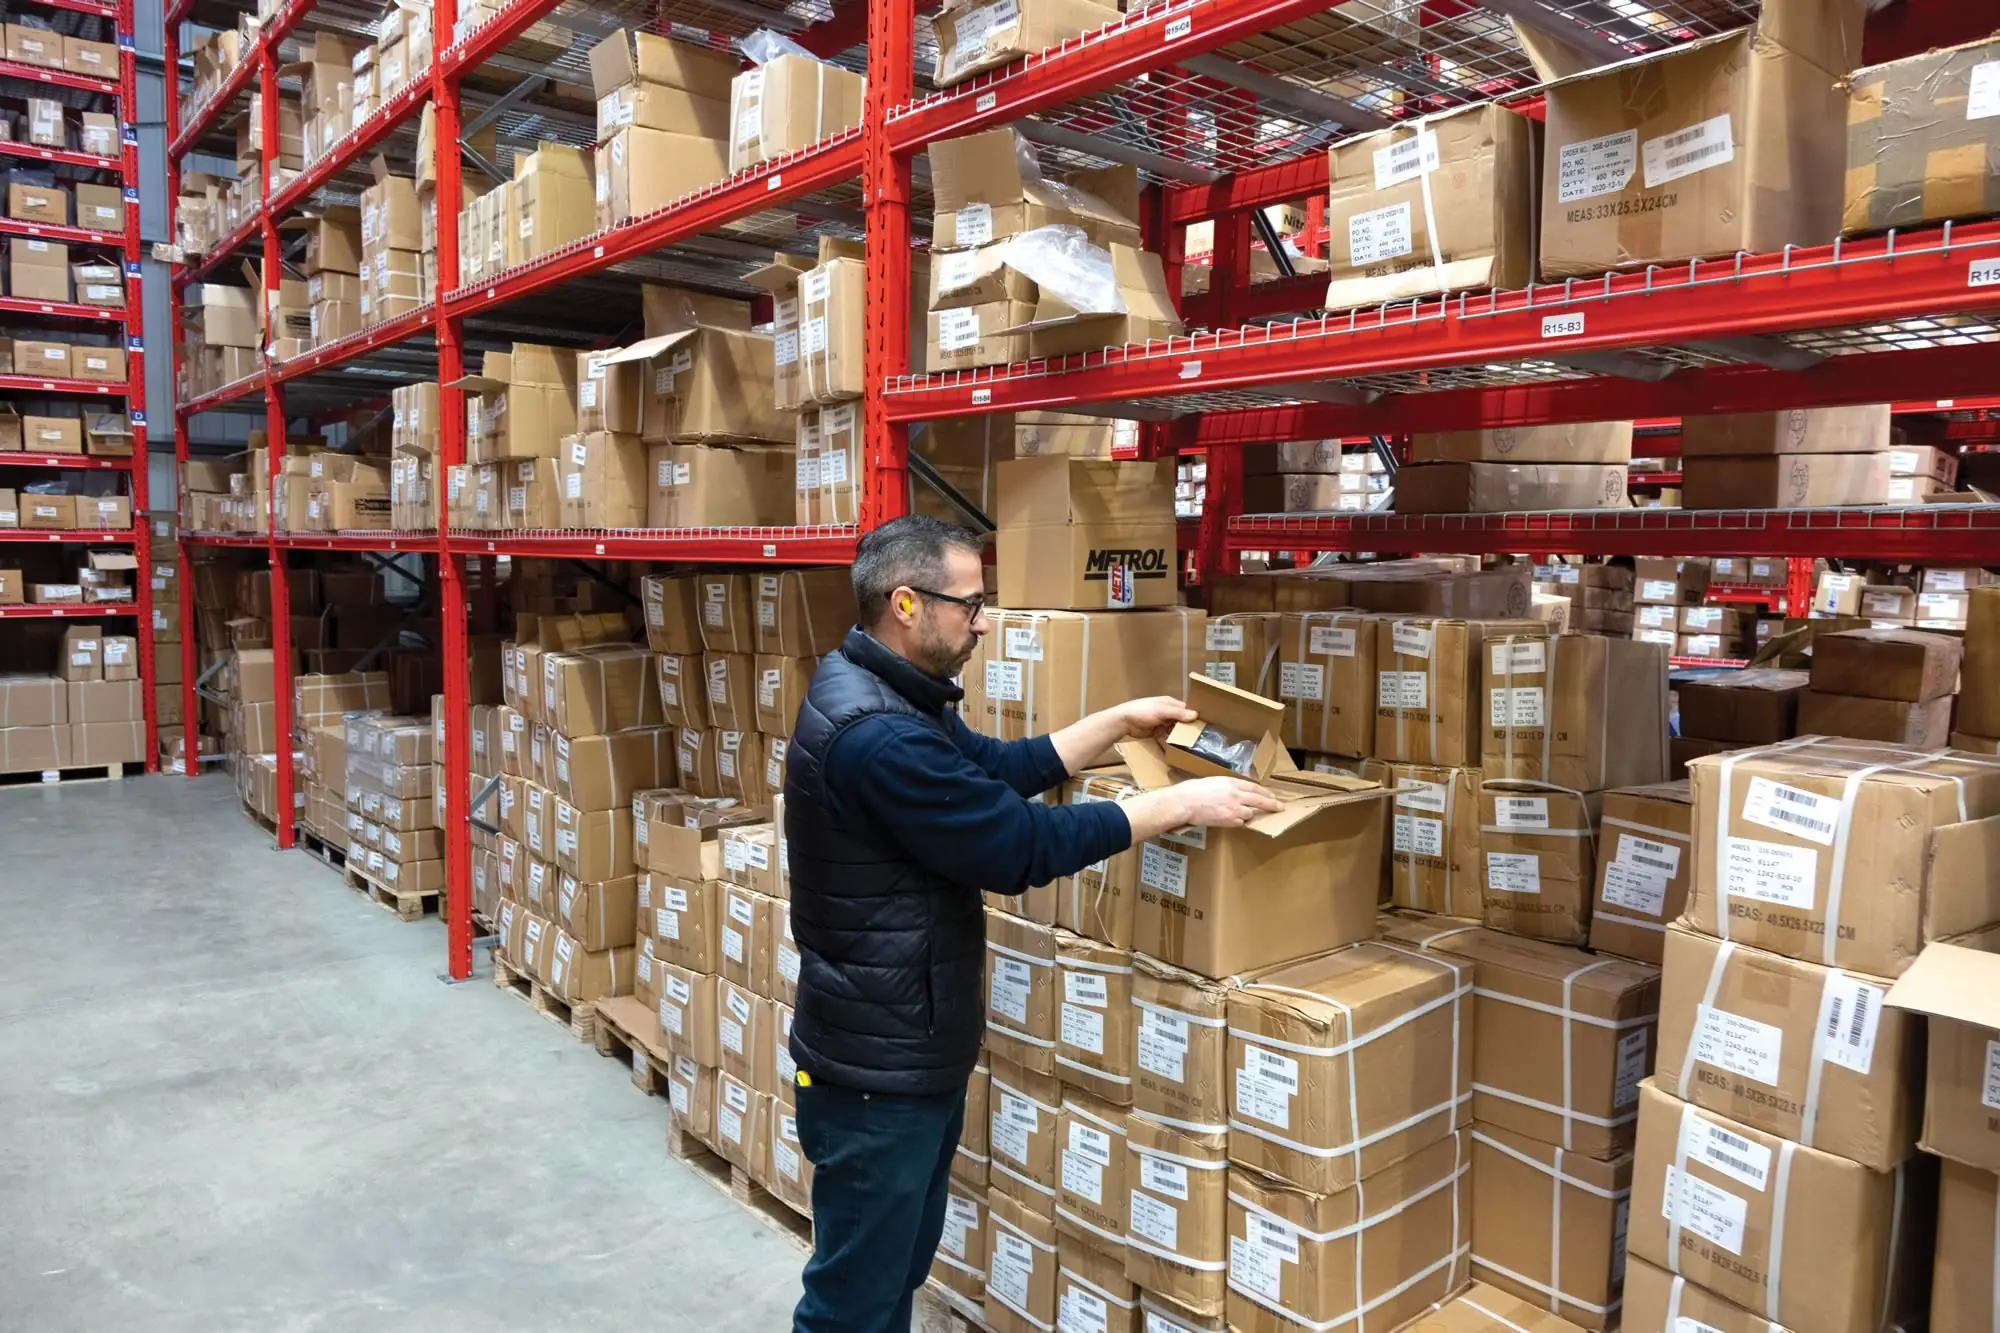 man opening a box in a warehouse